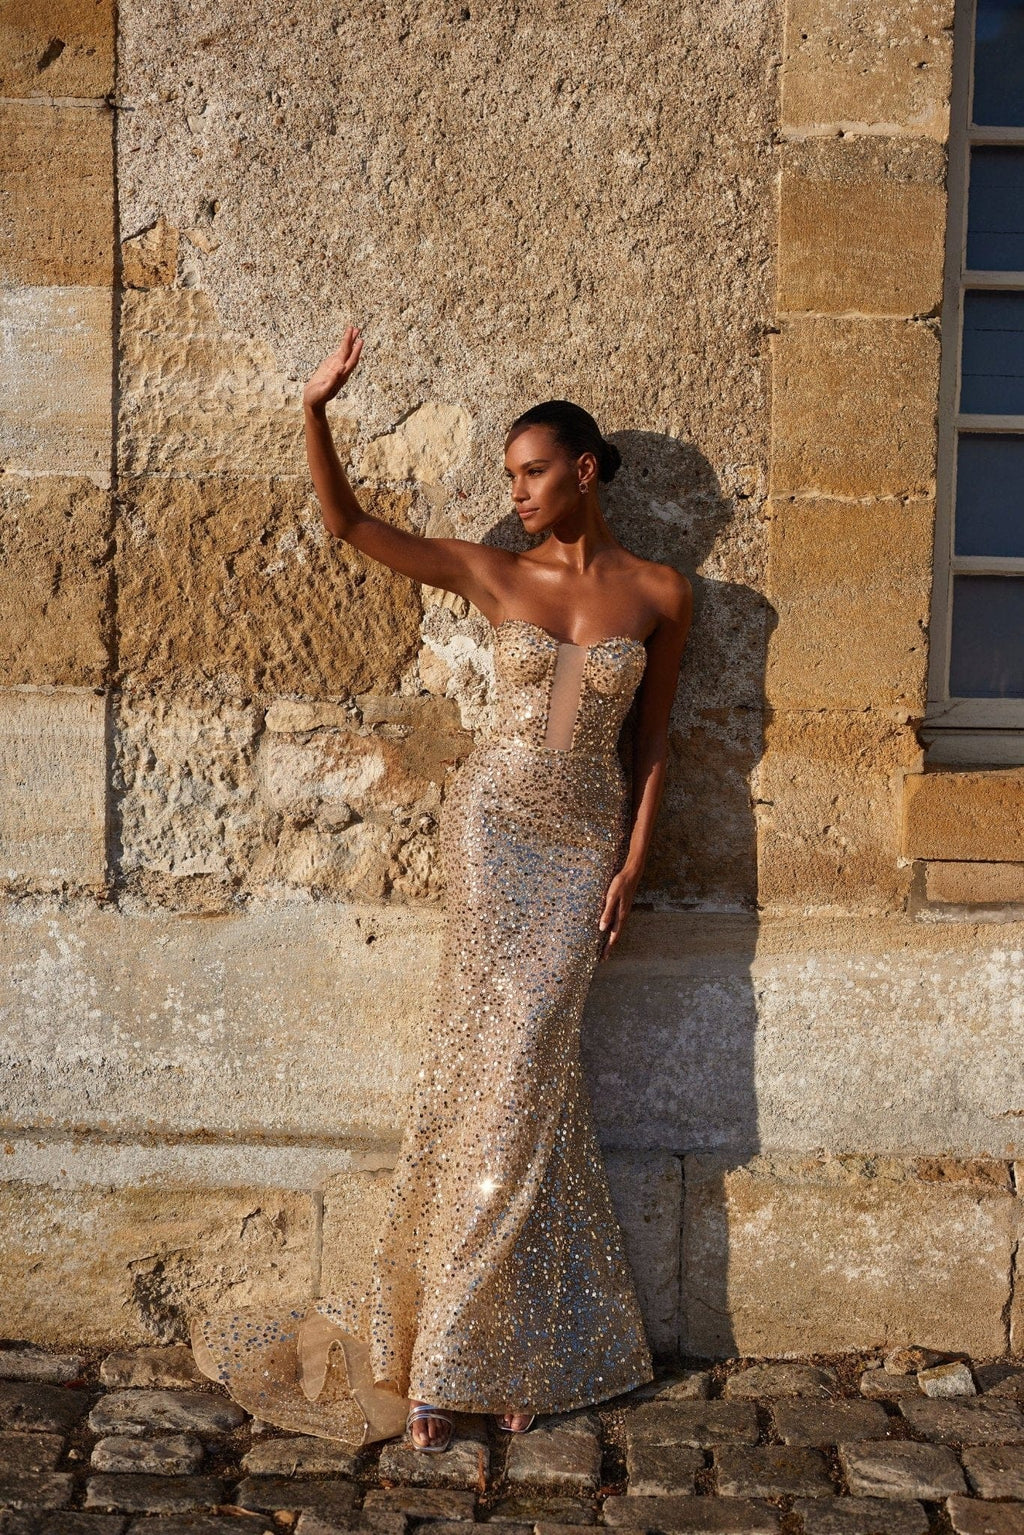 Showstopper maxi dress covered in gold sequins - Milla